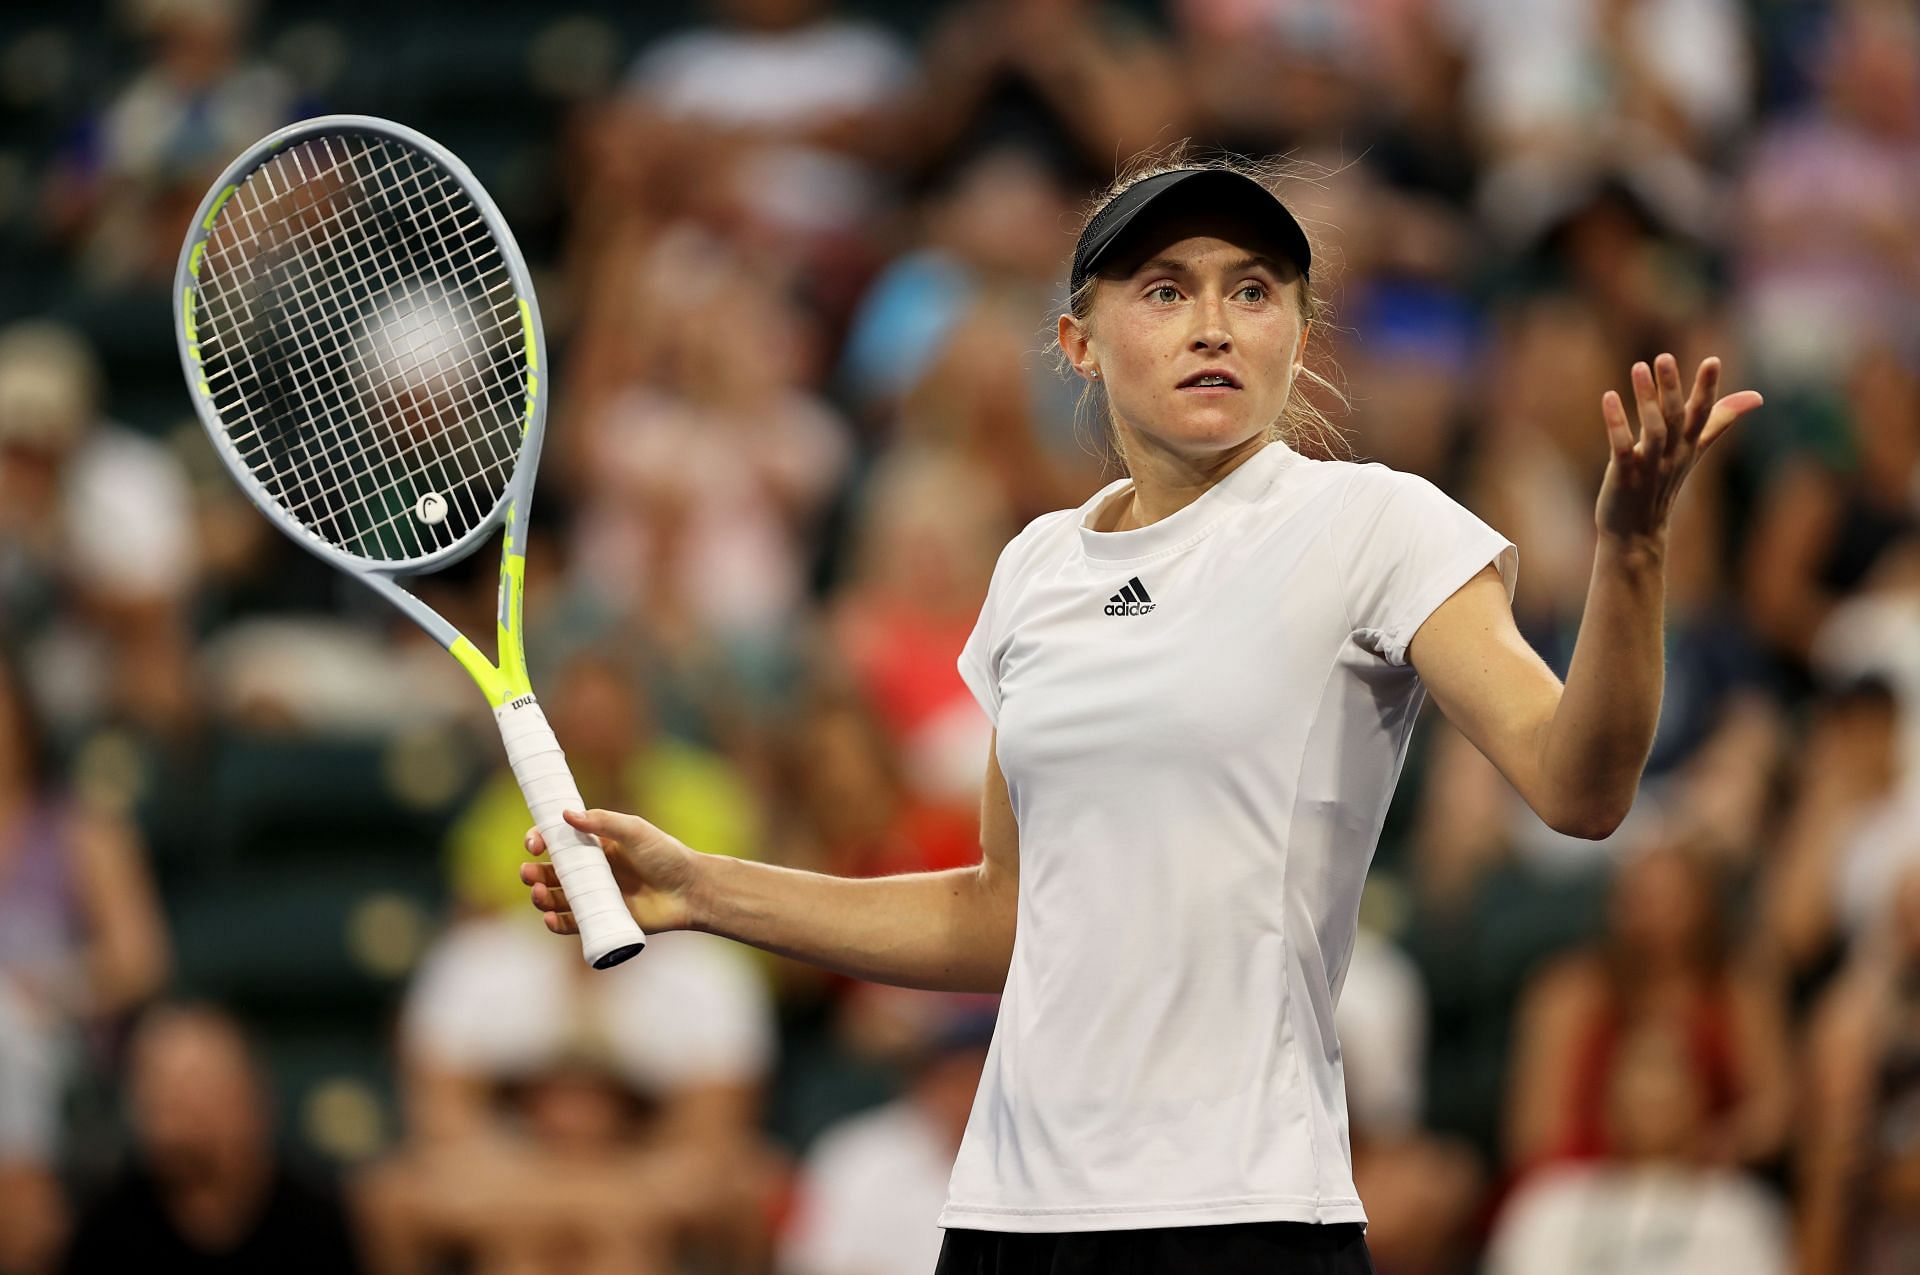 Sasnovich has posted some big results at Indian Wells in the past.